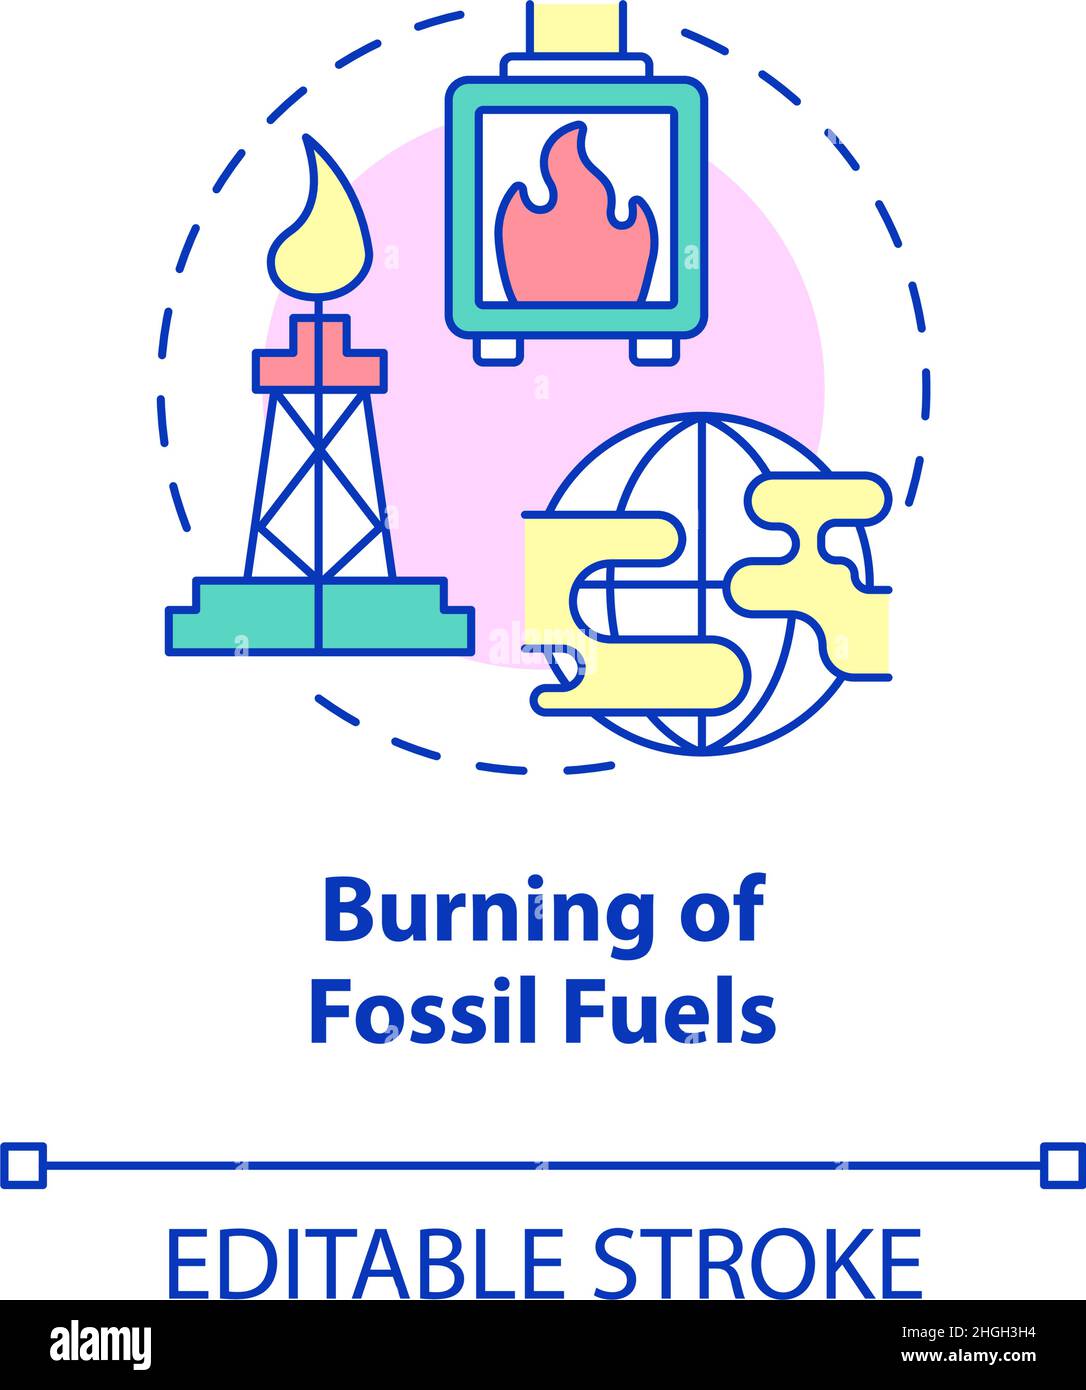 Burning of fossil fuels concept icon Stock Vector